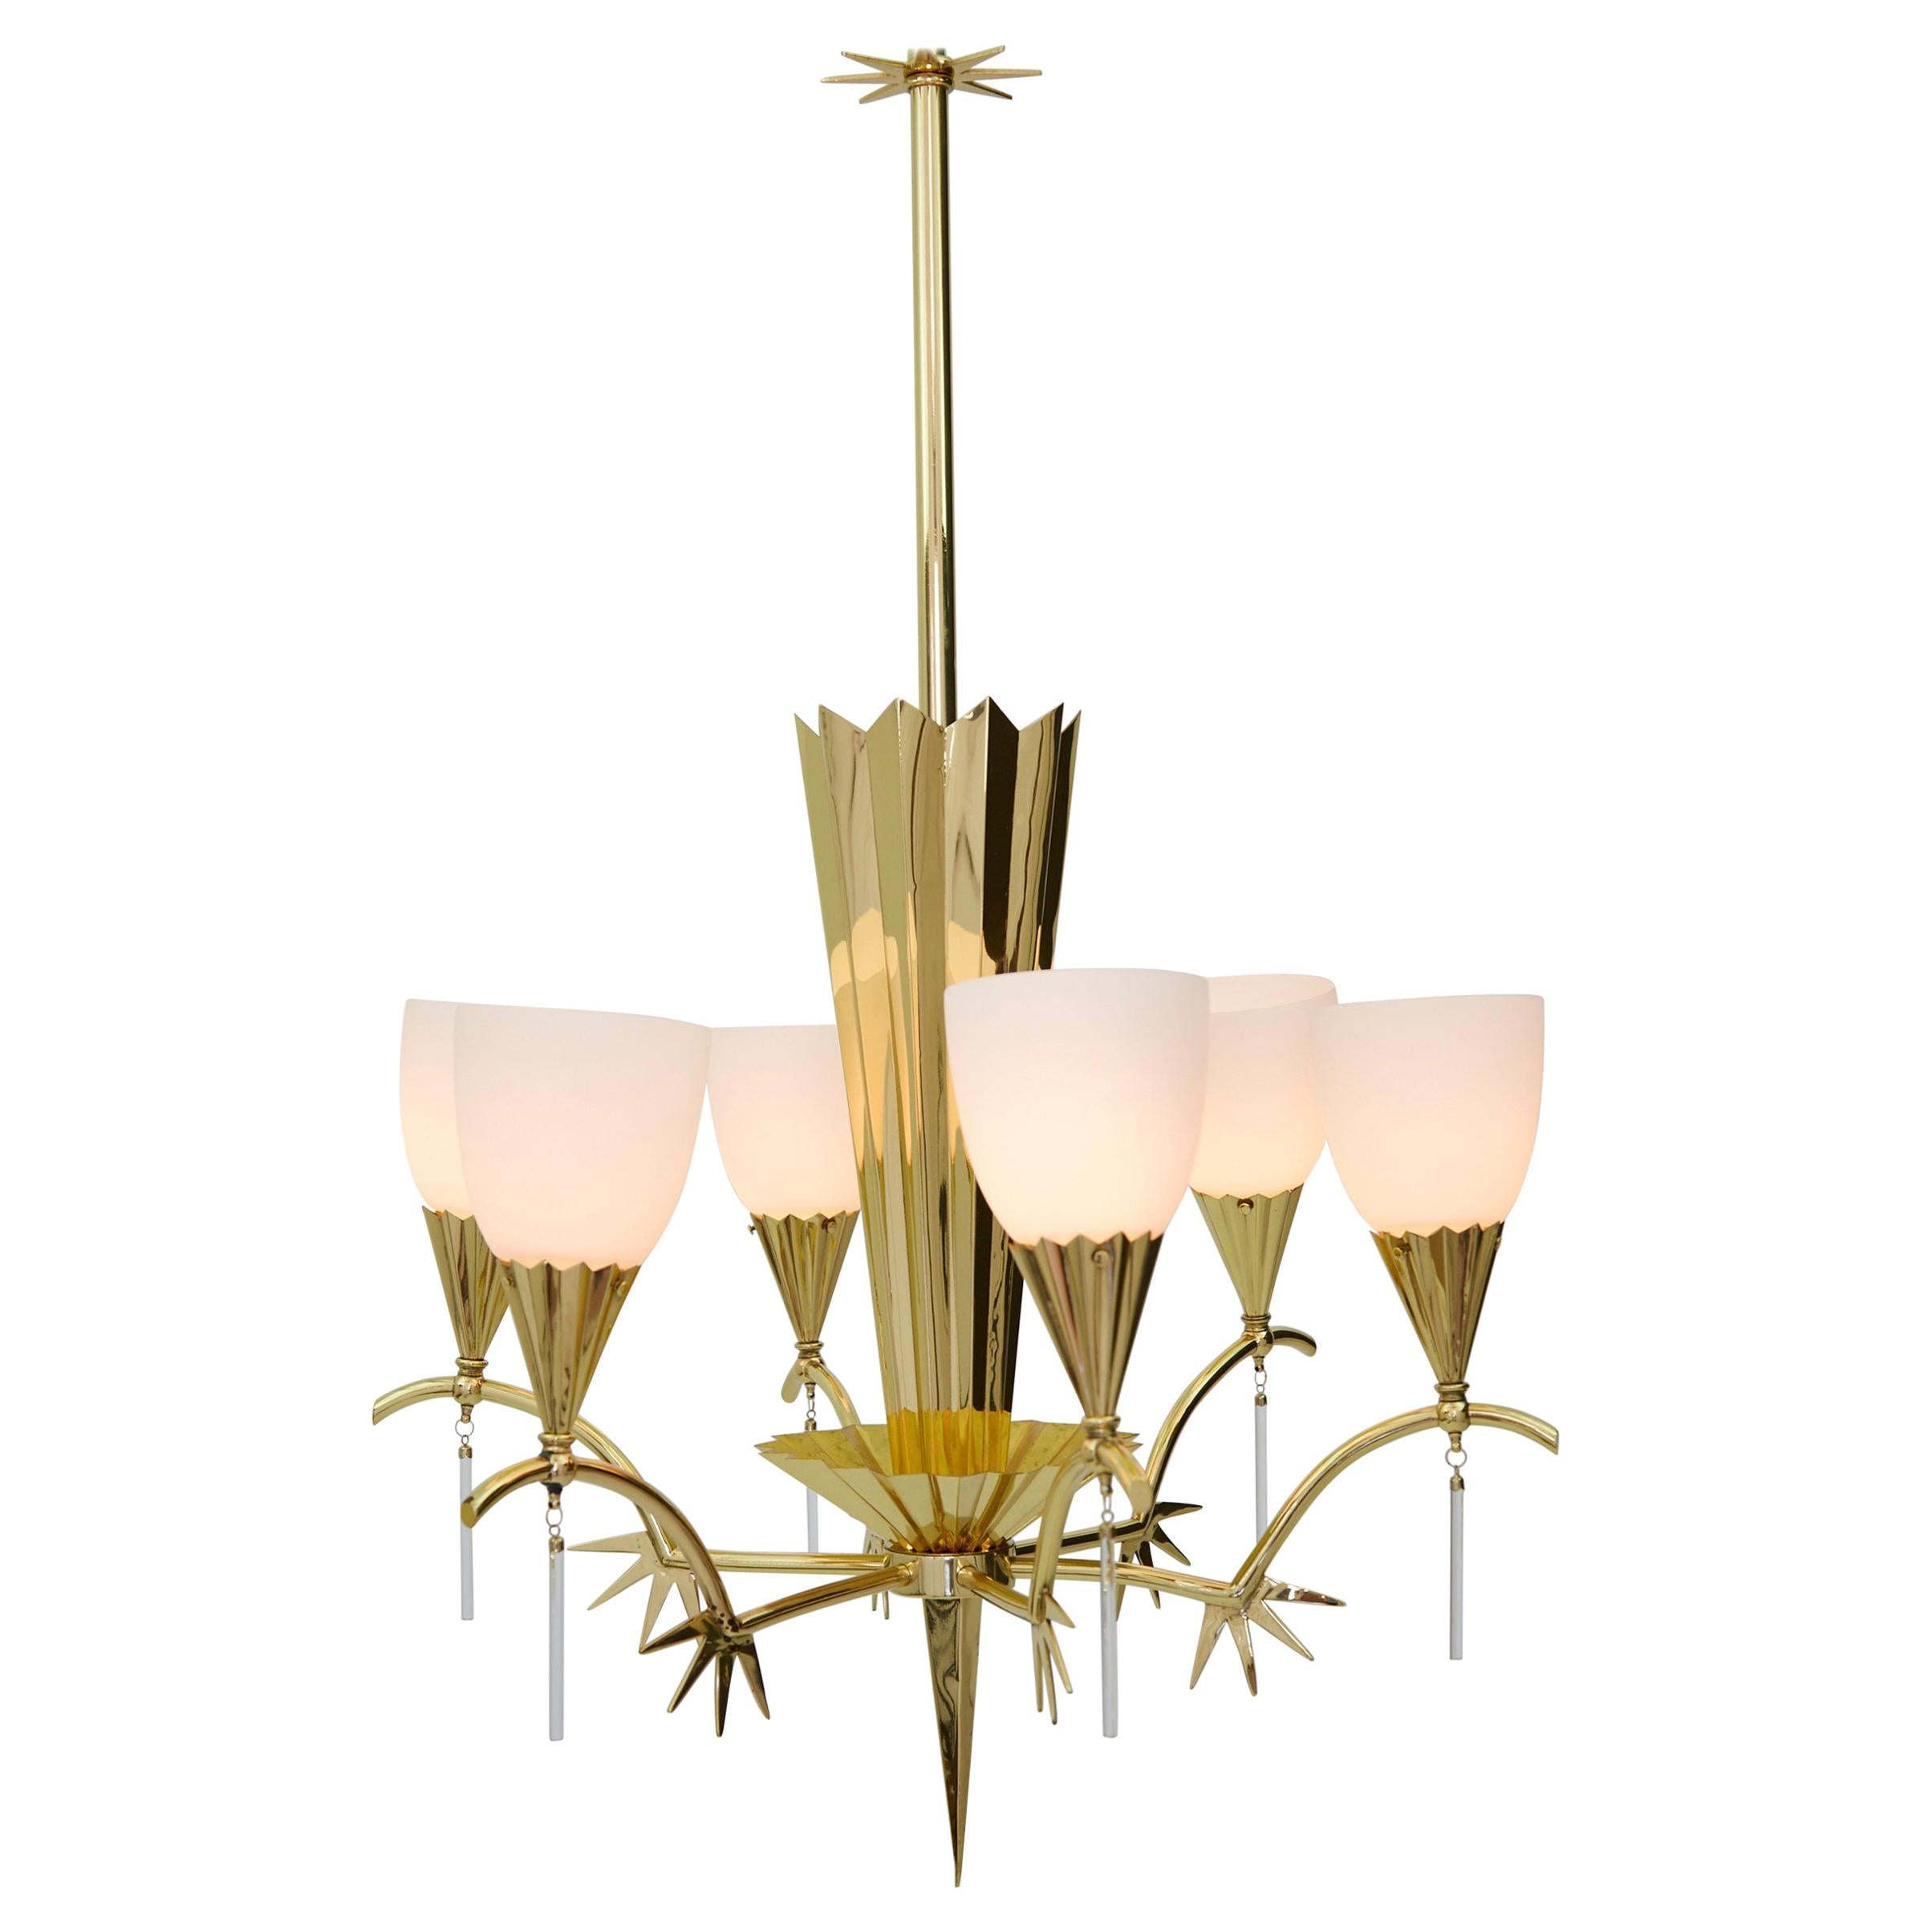 Six-Arm Italian Brass Chandelier with Decorative Spikes, 1940s For Sale